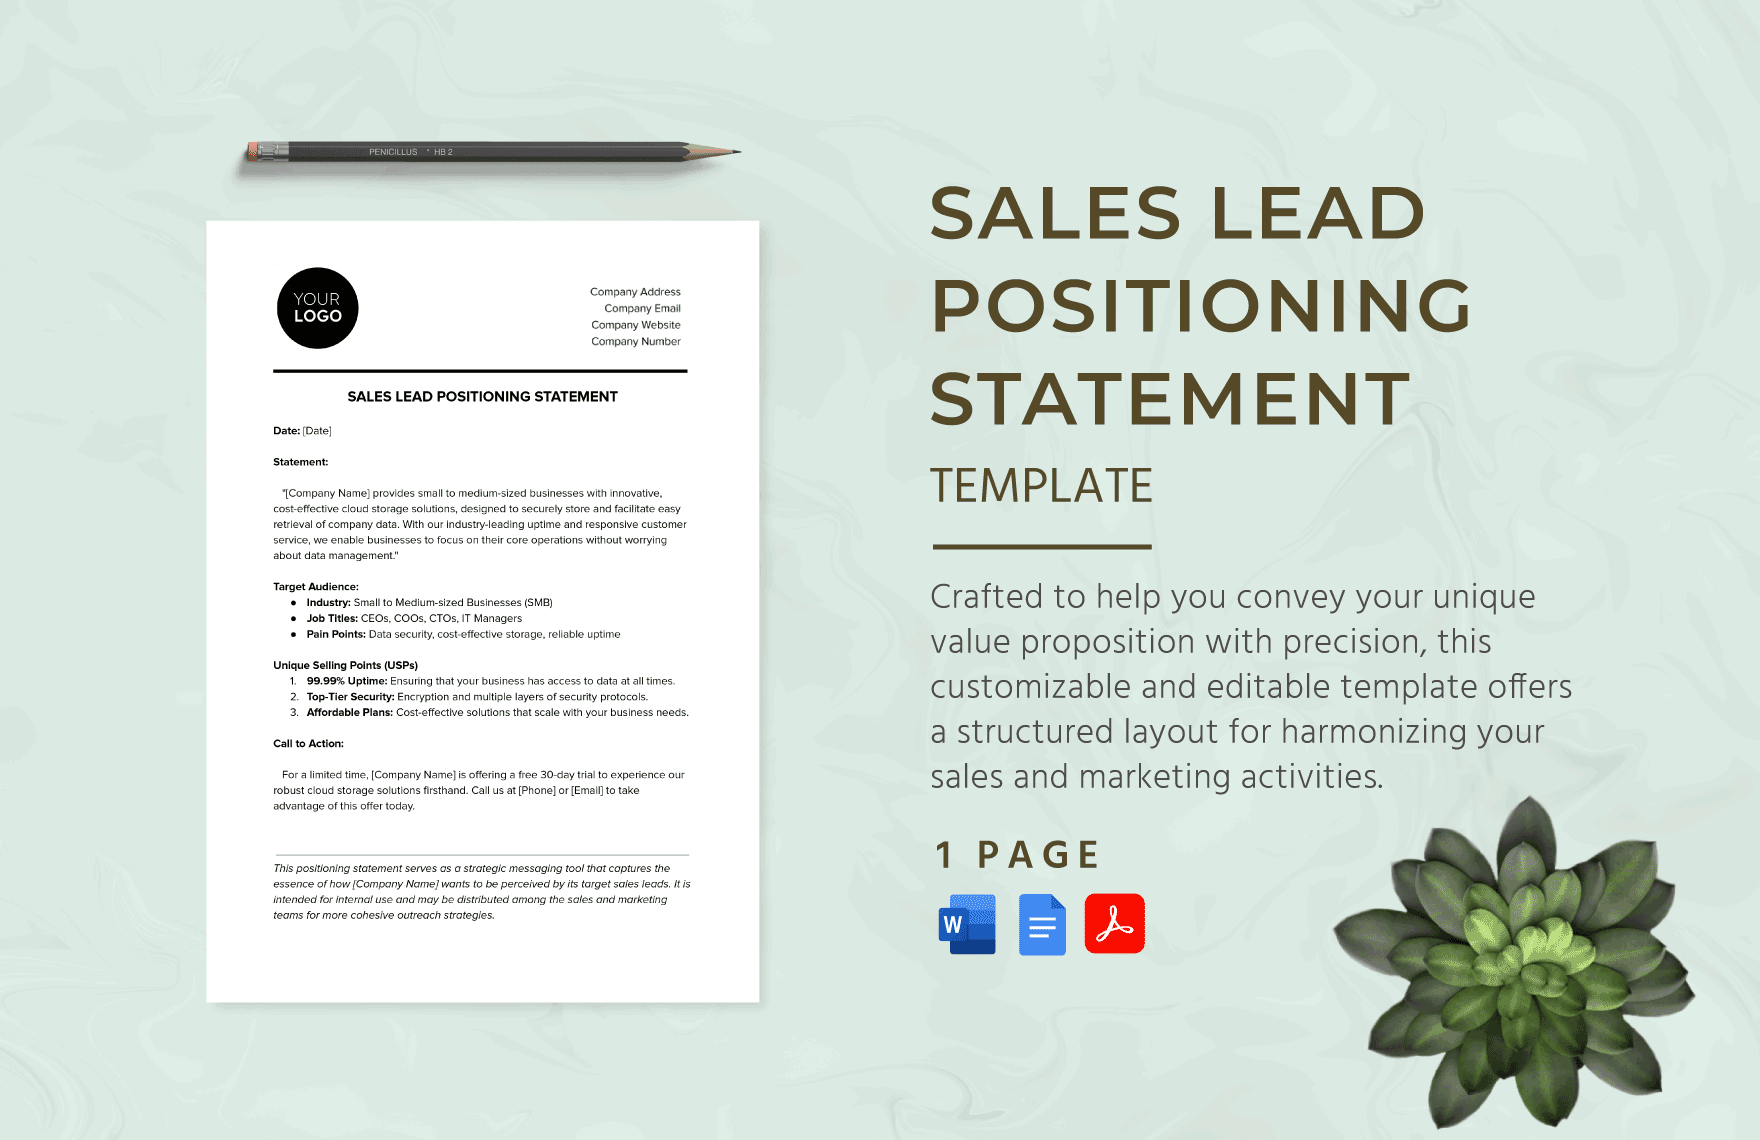 Sales Lead Positioning Statement Template in Word, Google Docs, PDF